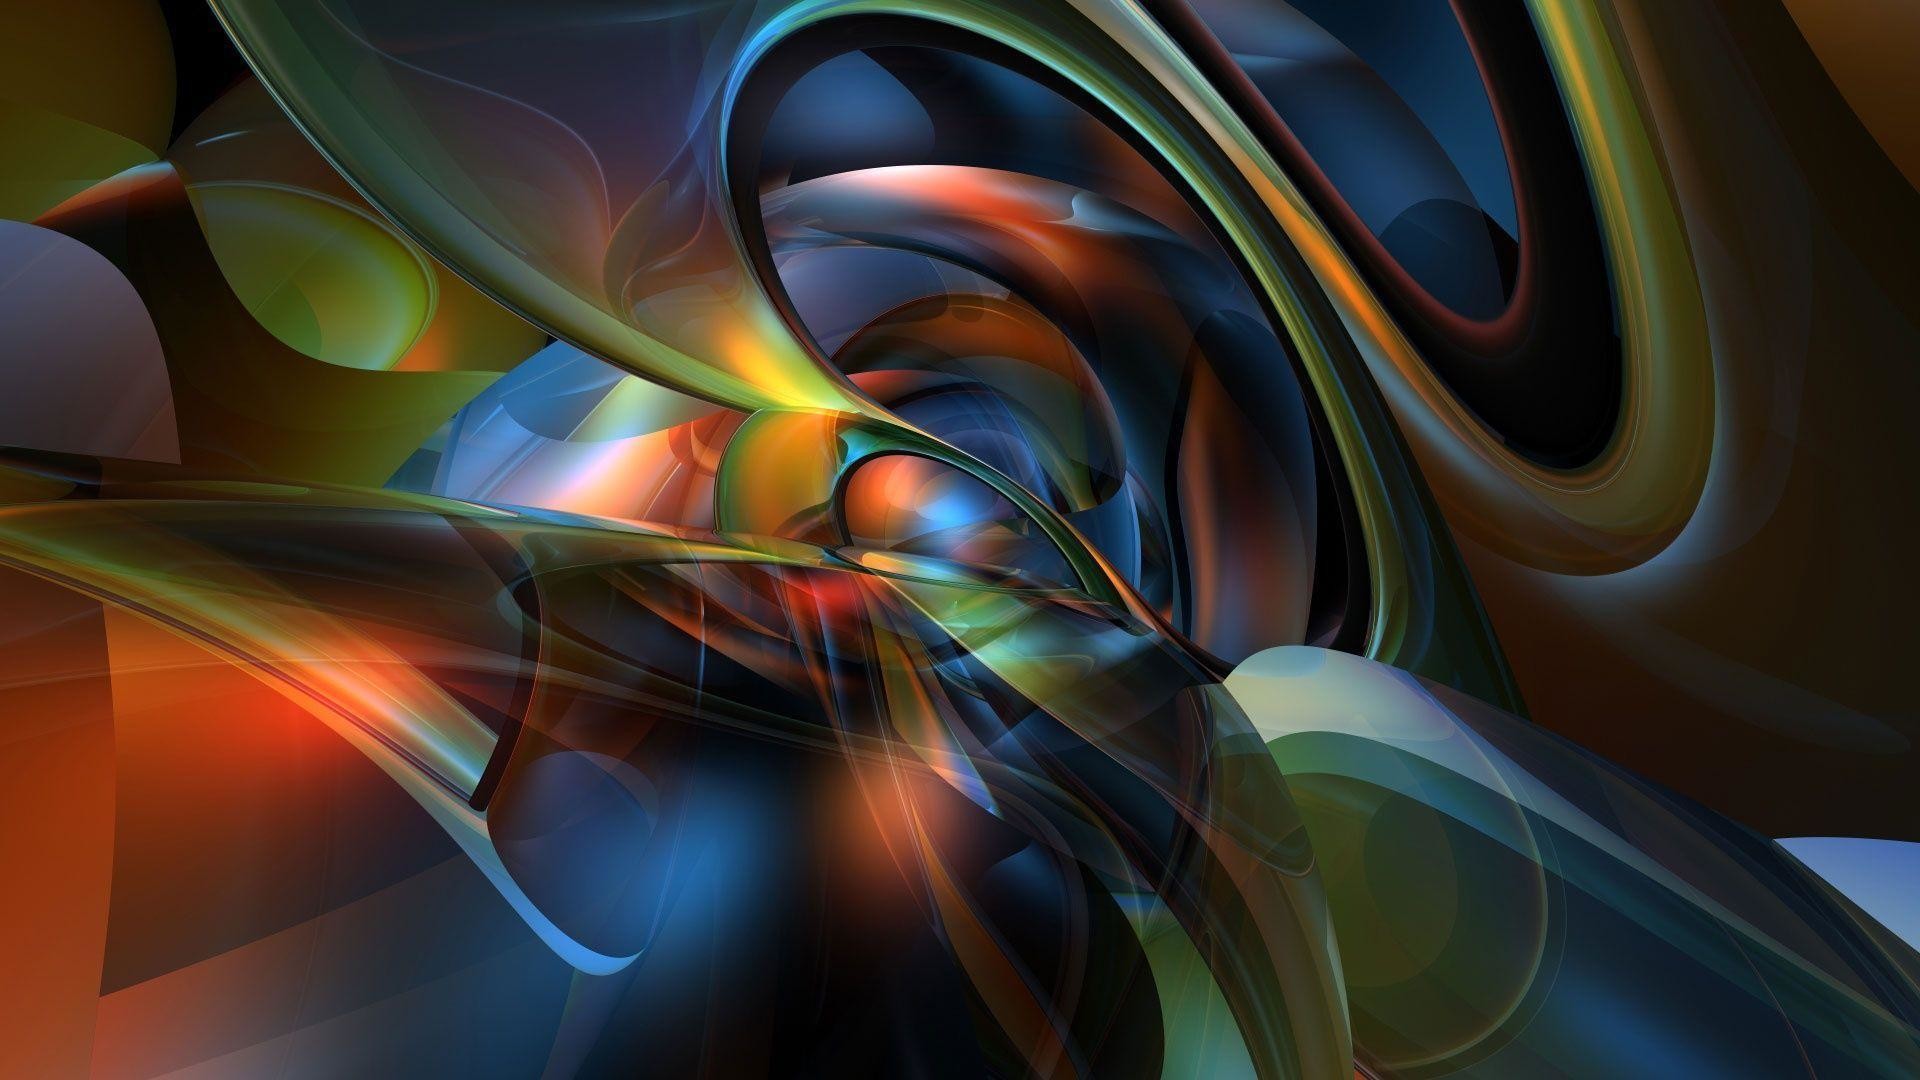 1920x1080 3D Wallpapers | Abstract Desktop Backgrounds | HD Wallpapers - Page 10